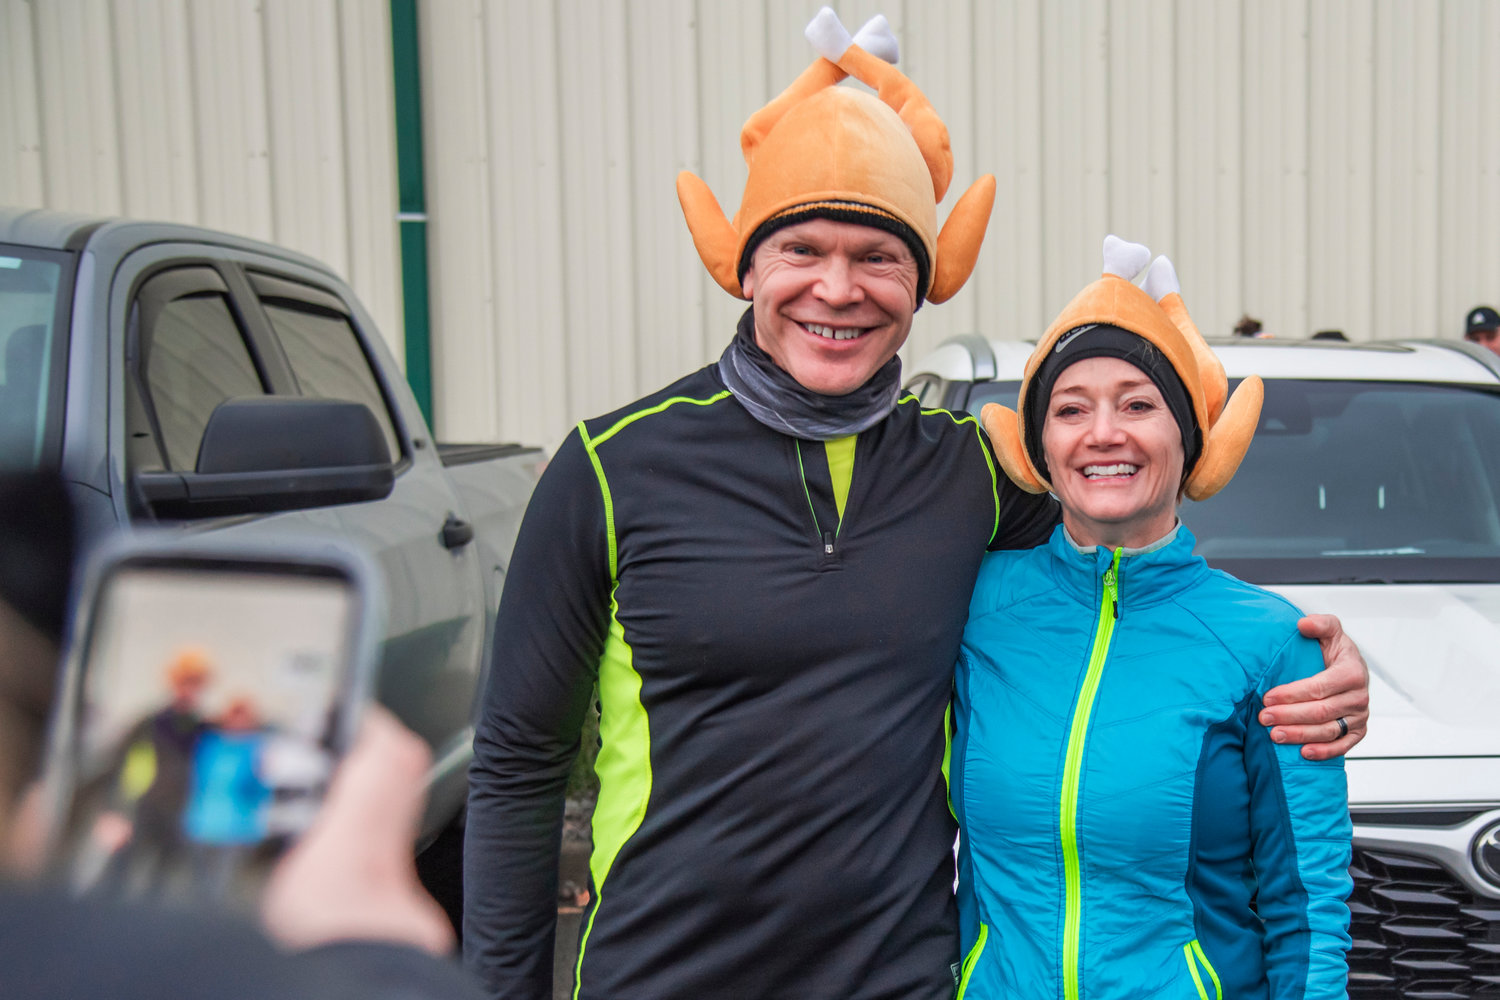 Todd and Denise Gentzler smile and pose for a photo with turkey caps before participating in a Turkey Trot 5k in Chehalis on Thanksgiving Day.